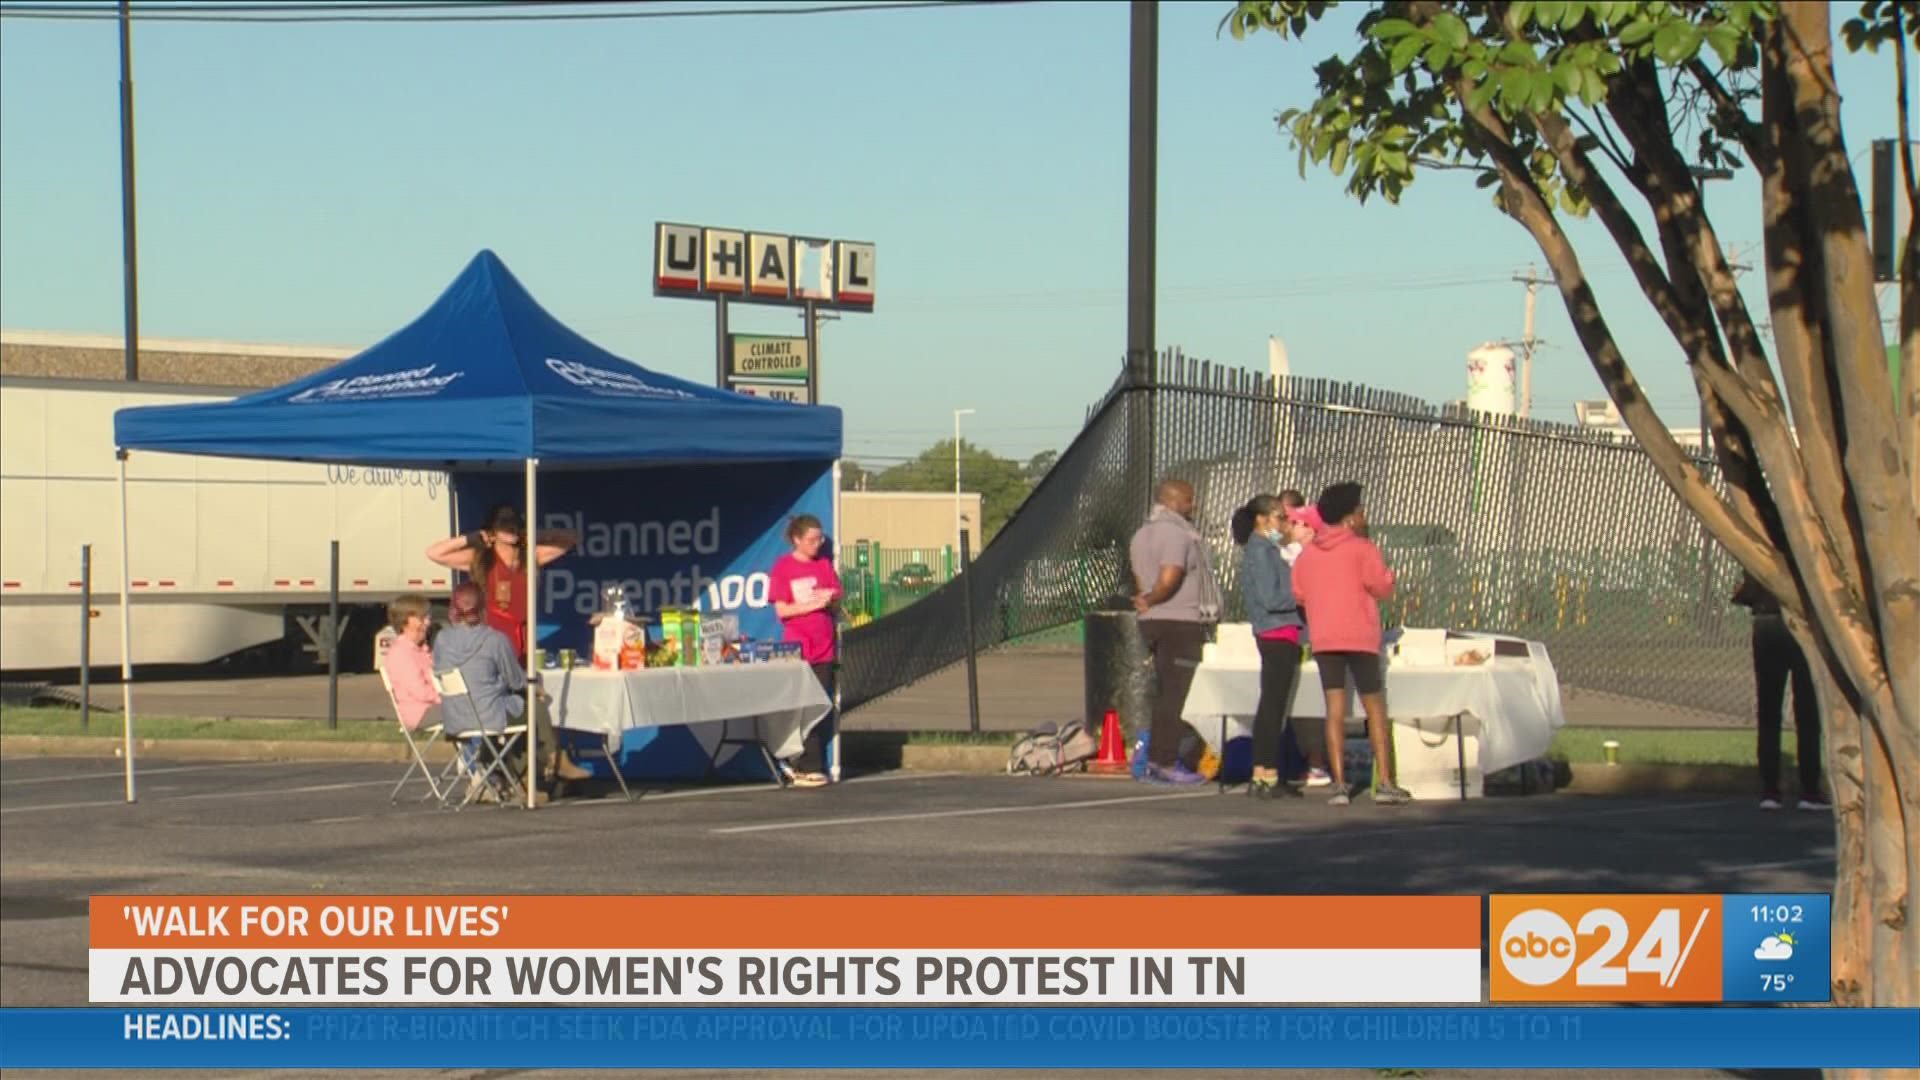 This extended protest will start in Memphis and end in Johnson City, TN, allowing activist to have several conversations about abortion rights statewide.